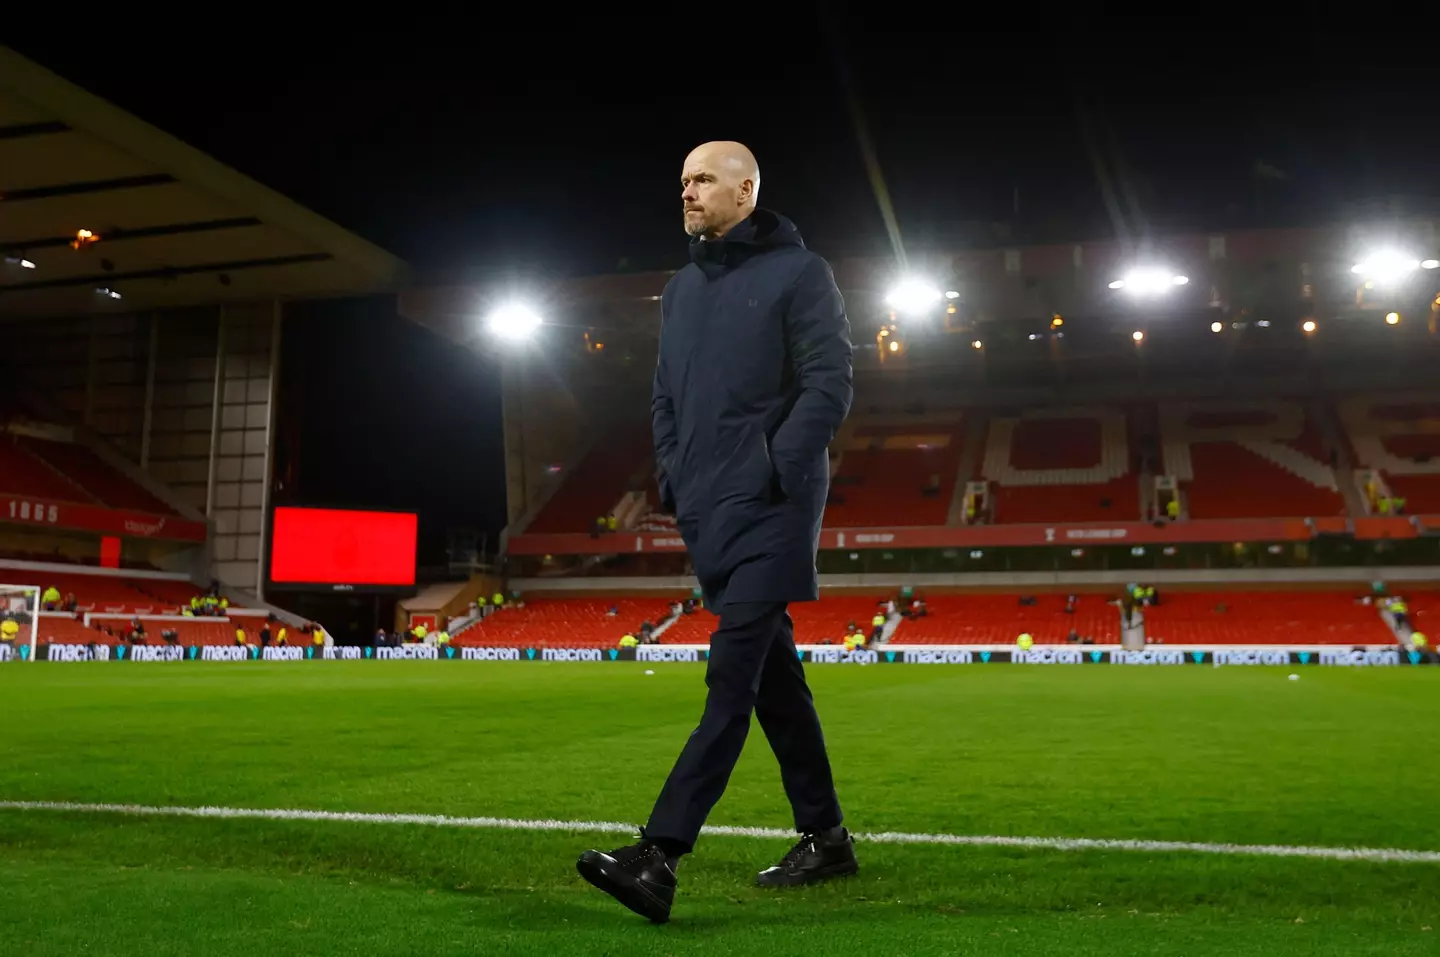 Gary Neville hasn’t ruled out the idea of Erik ten Hag leading Manchester United to the Premier League title ahead of Manchester City or Arsenal.